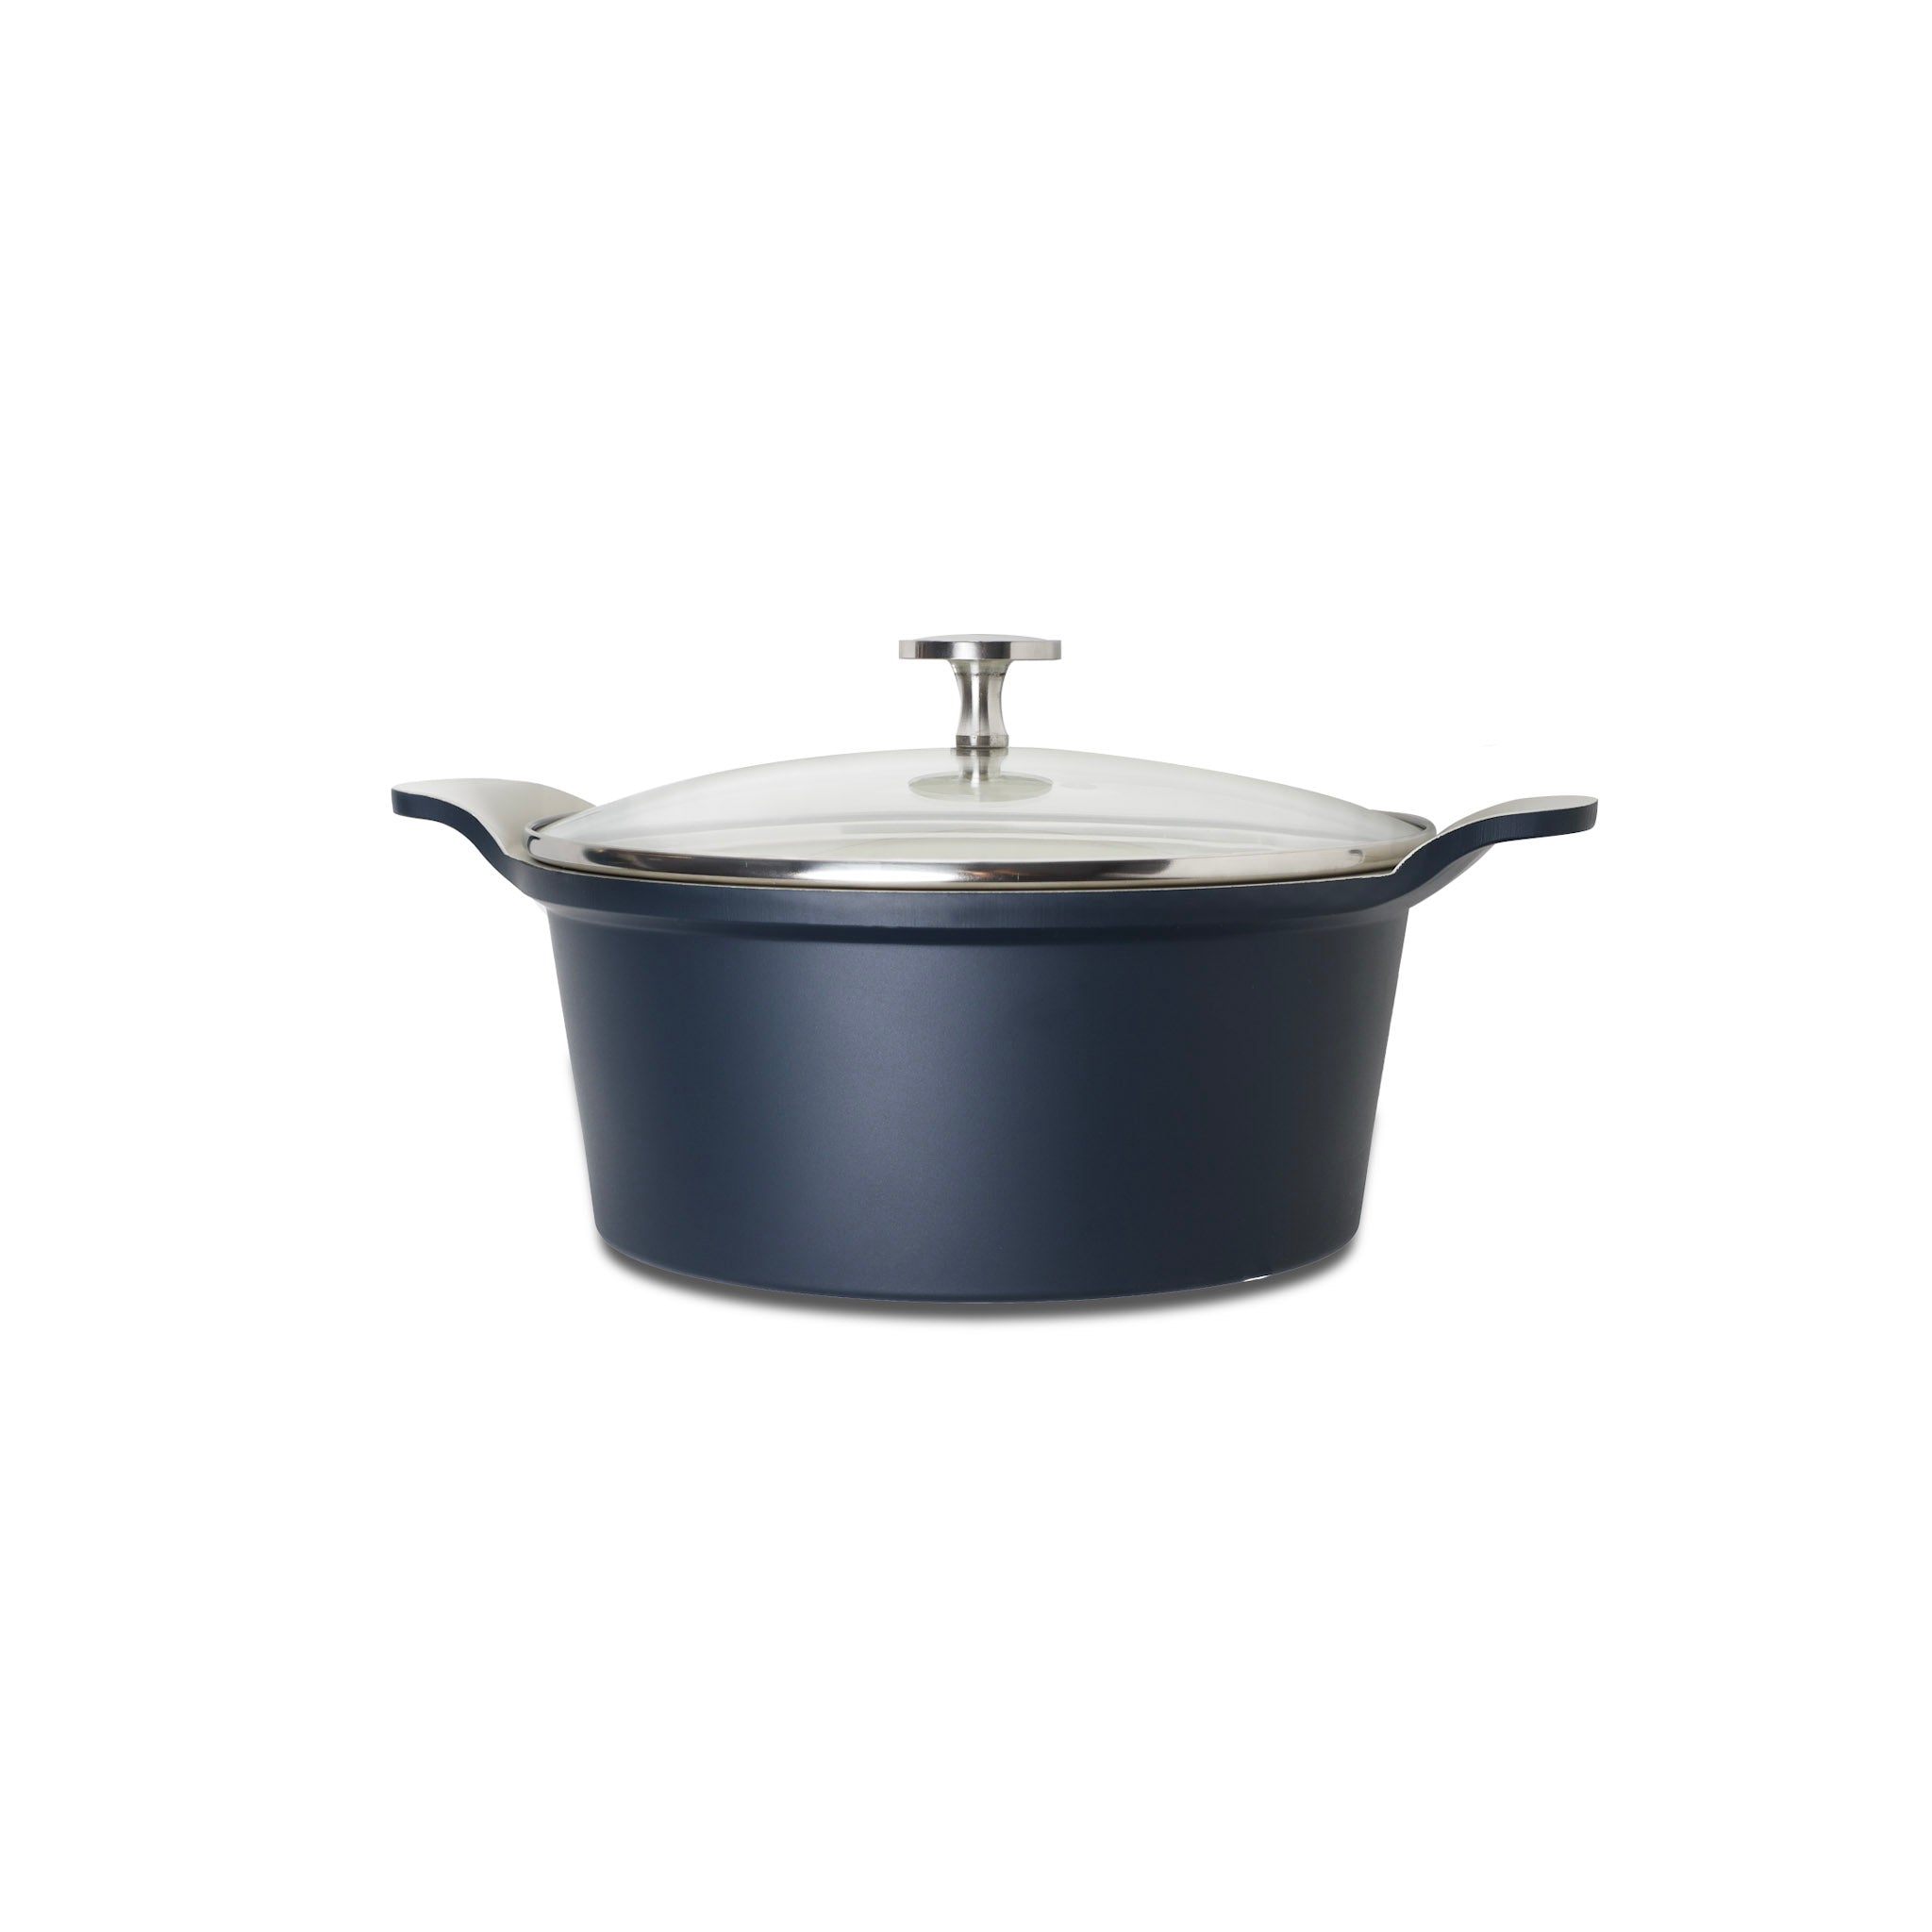 PHANTOM CHEF 4.2 QT Dutch Oven Pot with Lid | Non-Stick Ceramic Coating |  with Dual Handles & Handle Covers | PTFE & PFOA Free | Induction Compatible